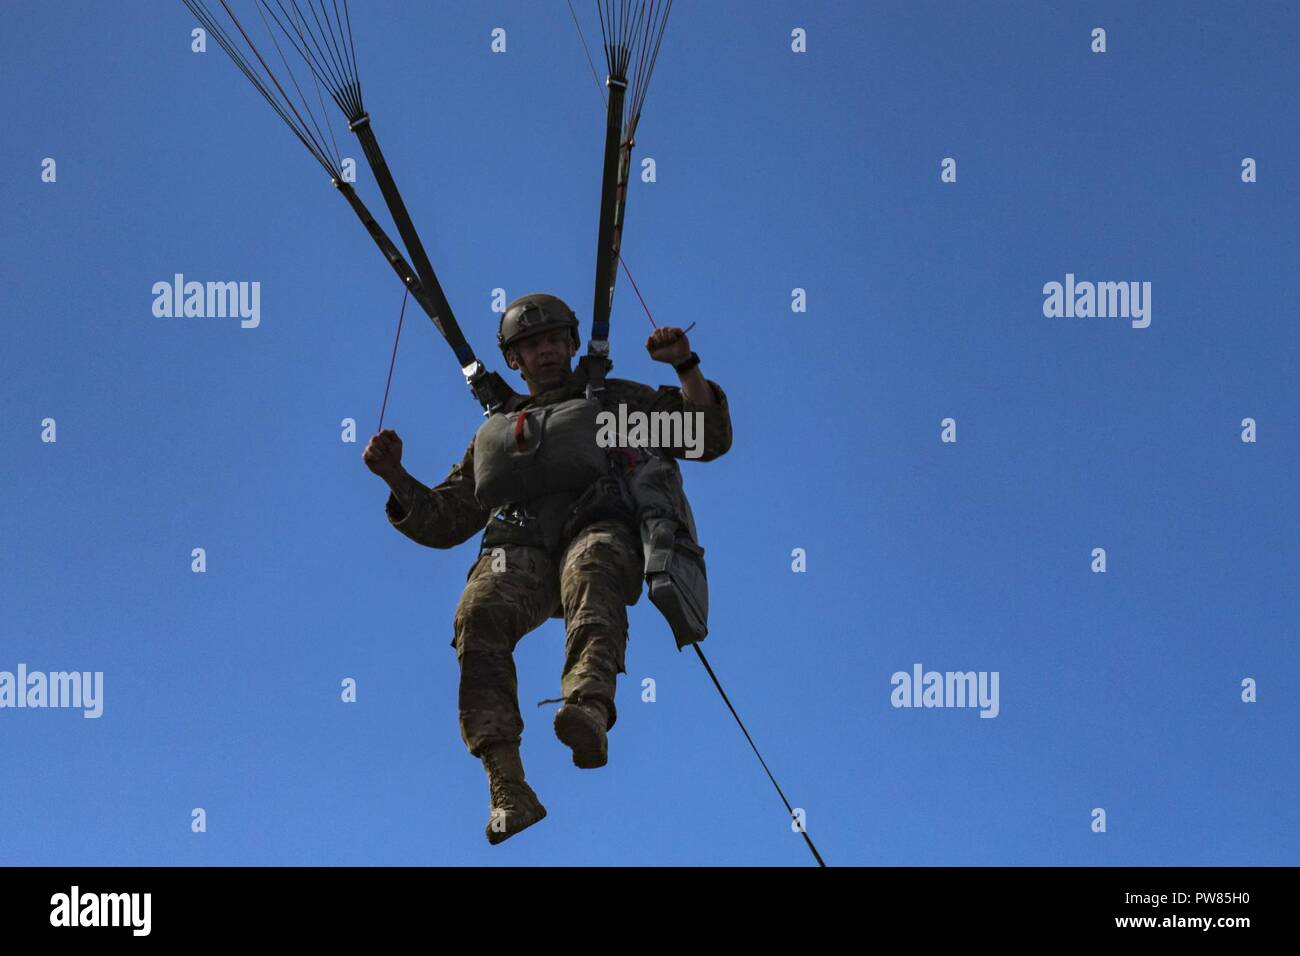 A member of the 820th Base Defense Group (BDG) descends during a static-line jump, Oct. 3, 2017, at the Lee Fulp drop zone in Tifton, Ga. The 820th Combat Operations Squadron’s four-person shop of parachute riggers are responsible for ensuring every 820th BDG parachute is serviceable, while also ensuring ground safety at the drop zone. The team has packed and inspected more than 490 parachutes in 2017. Stock Photo